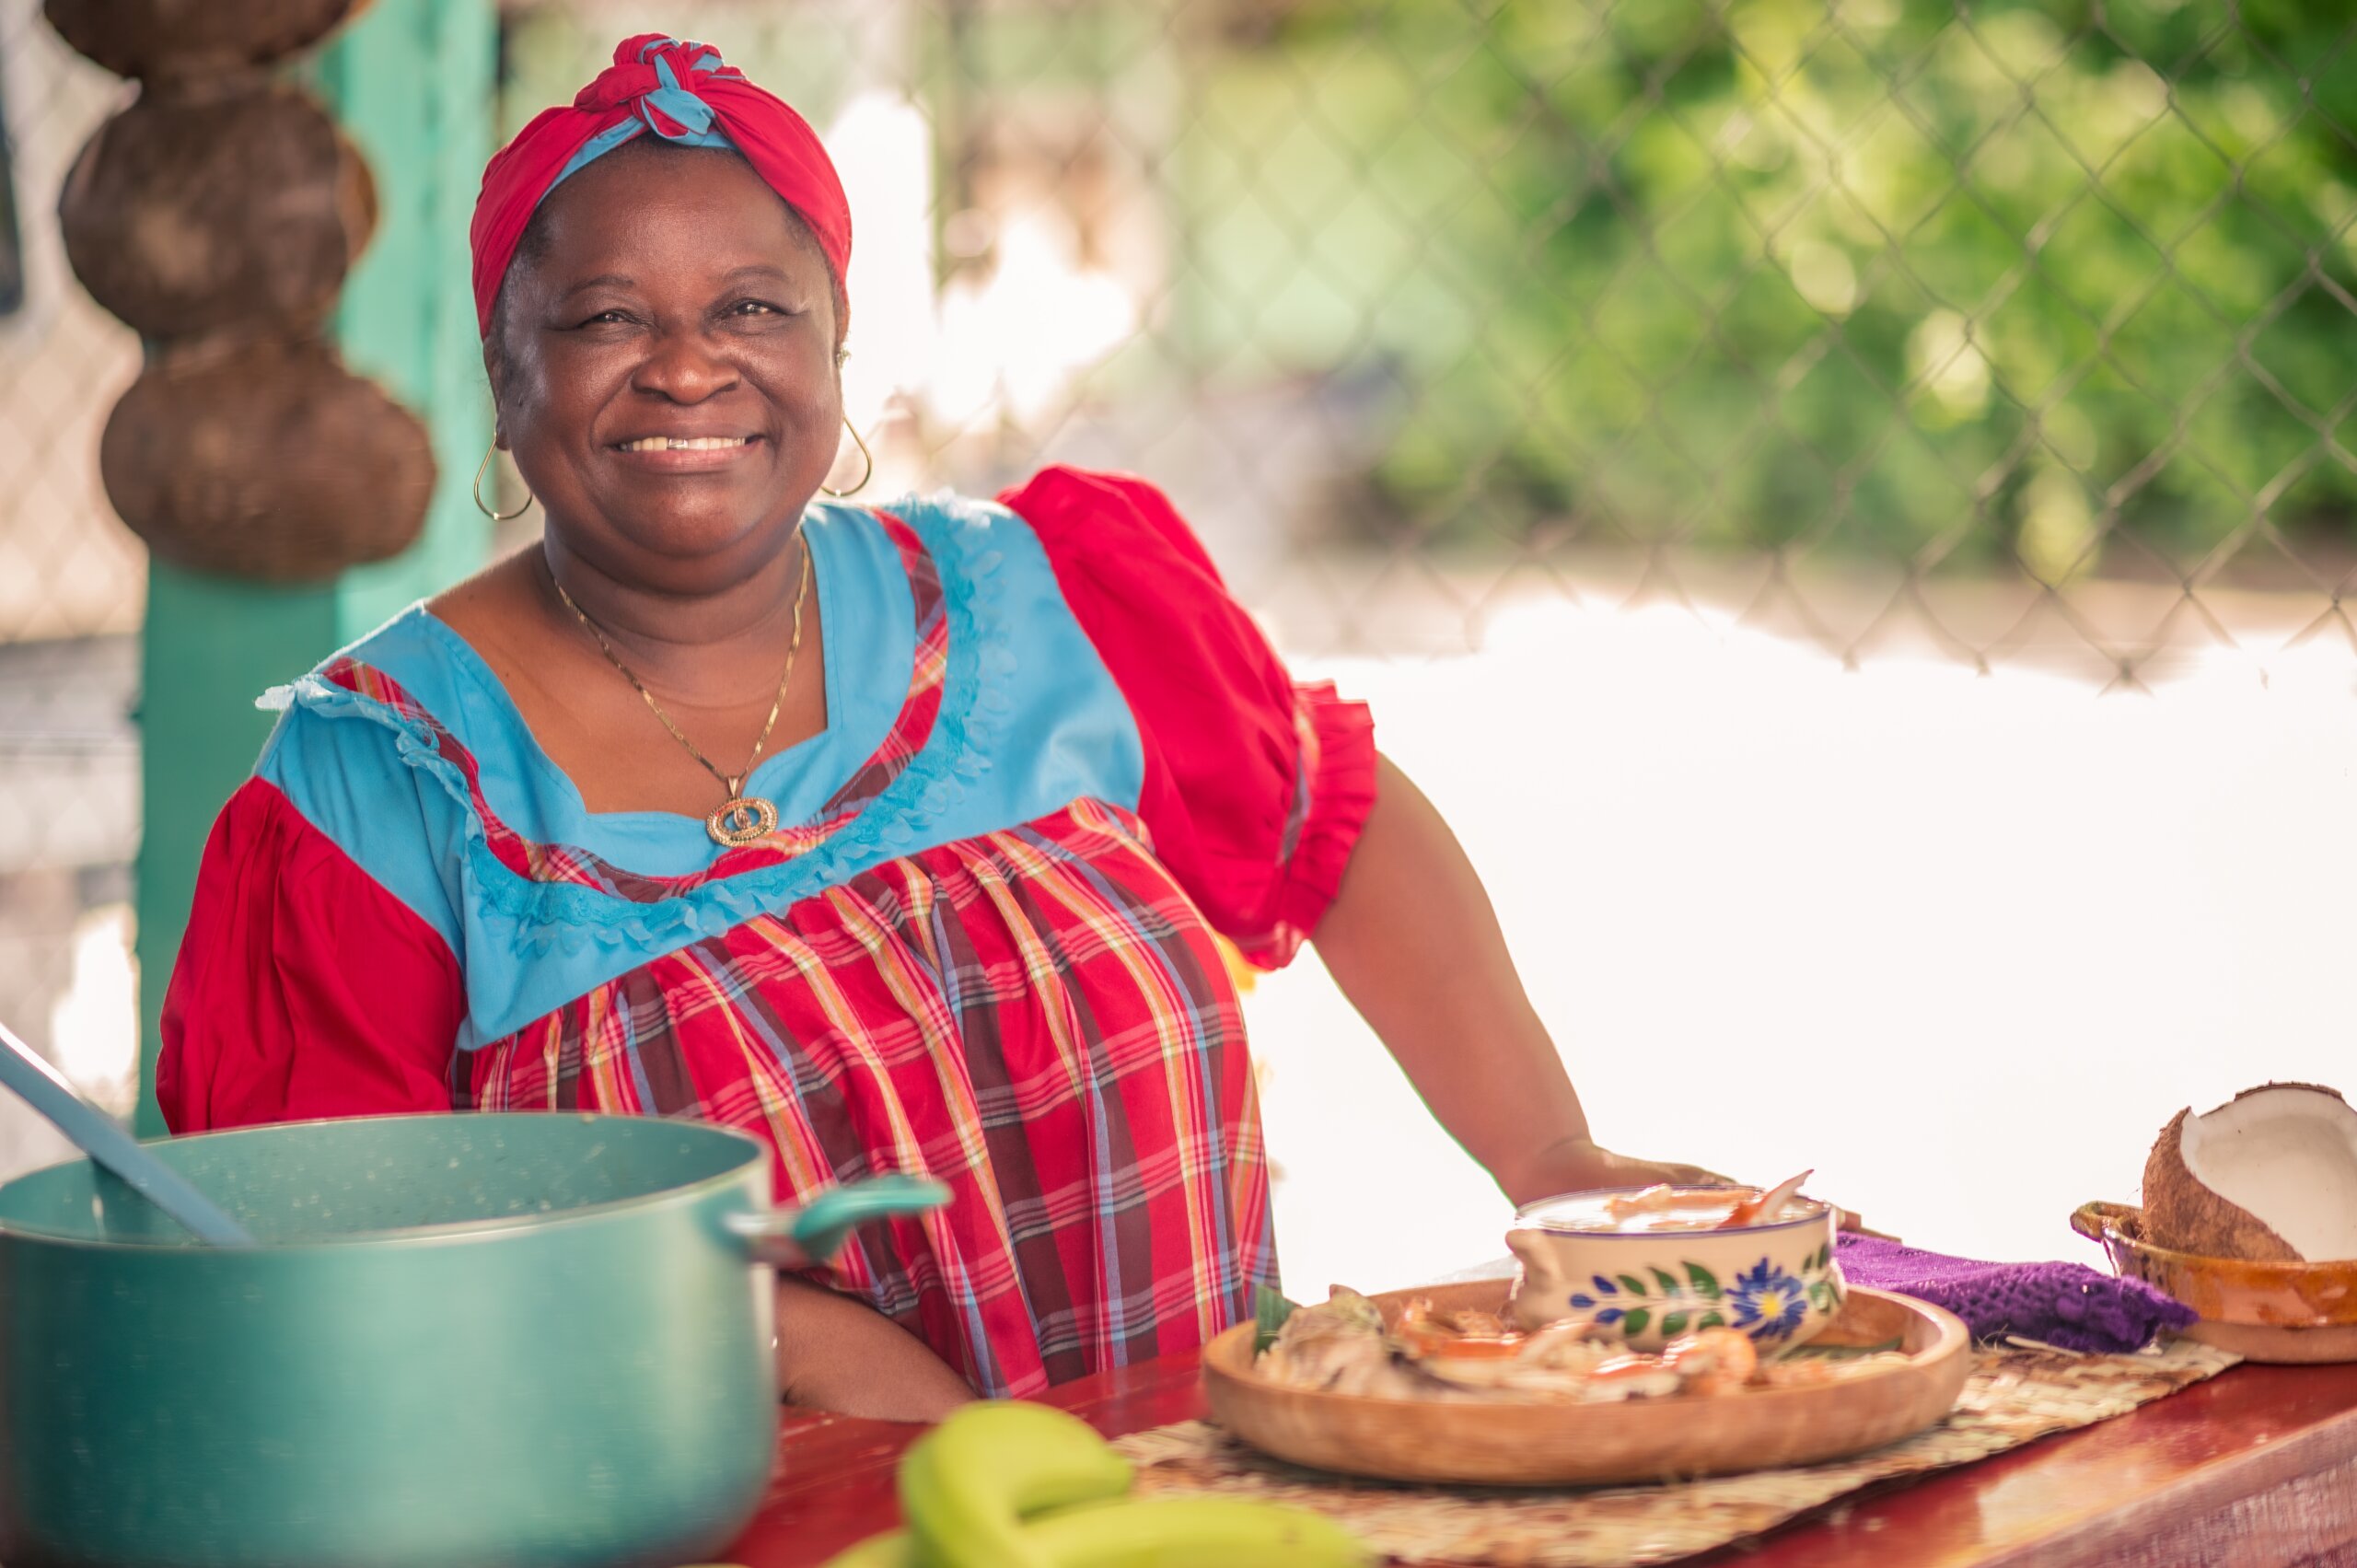 Portrait of an adult woman standing in her kitchen looking at a camera. Proud African American woman in colorful Garifuna dress.